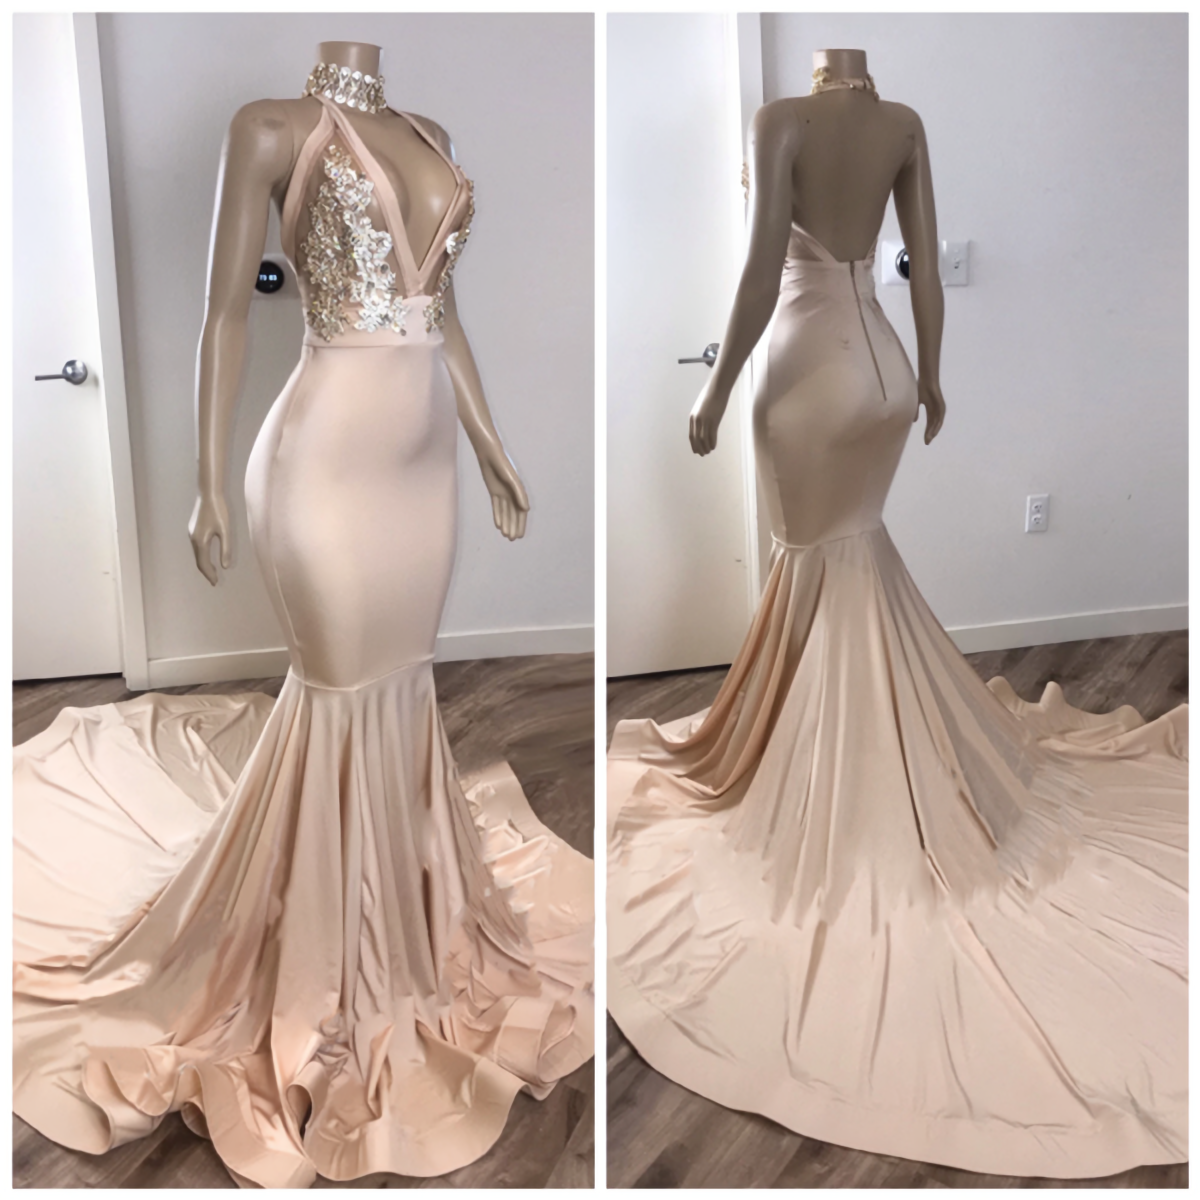 Party Dress Near Me, Black Girl Prom Dresses, Backless Champagne Pink Cheap Prom Dresses, With Appliques